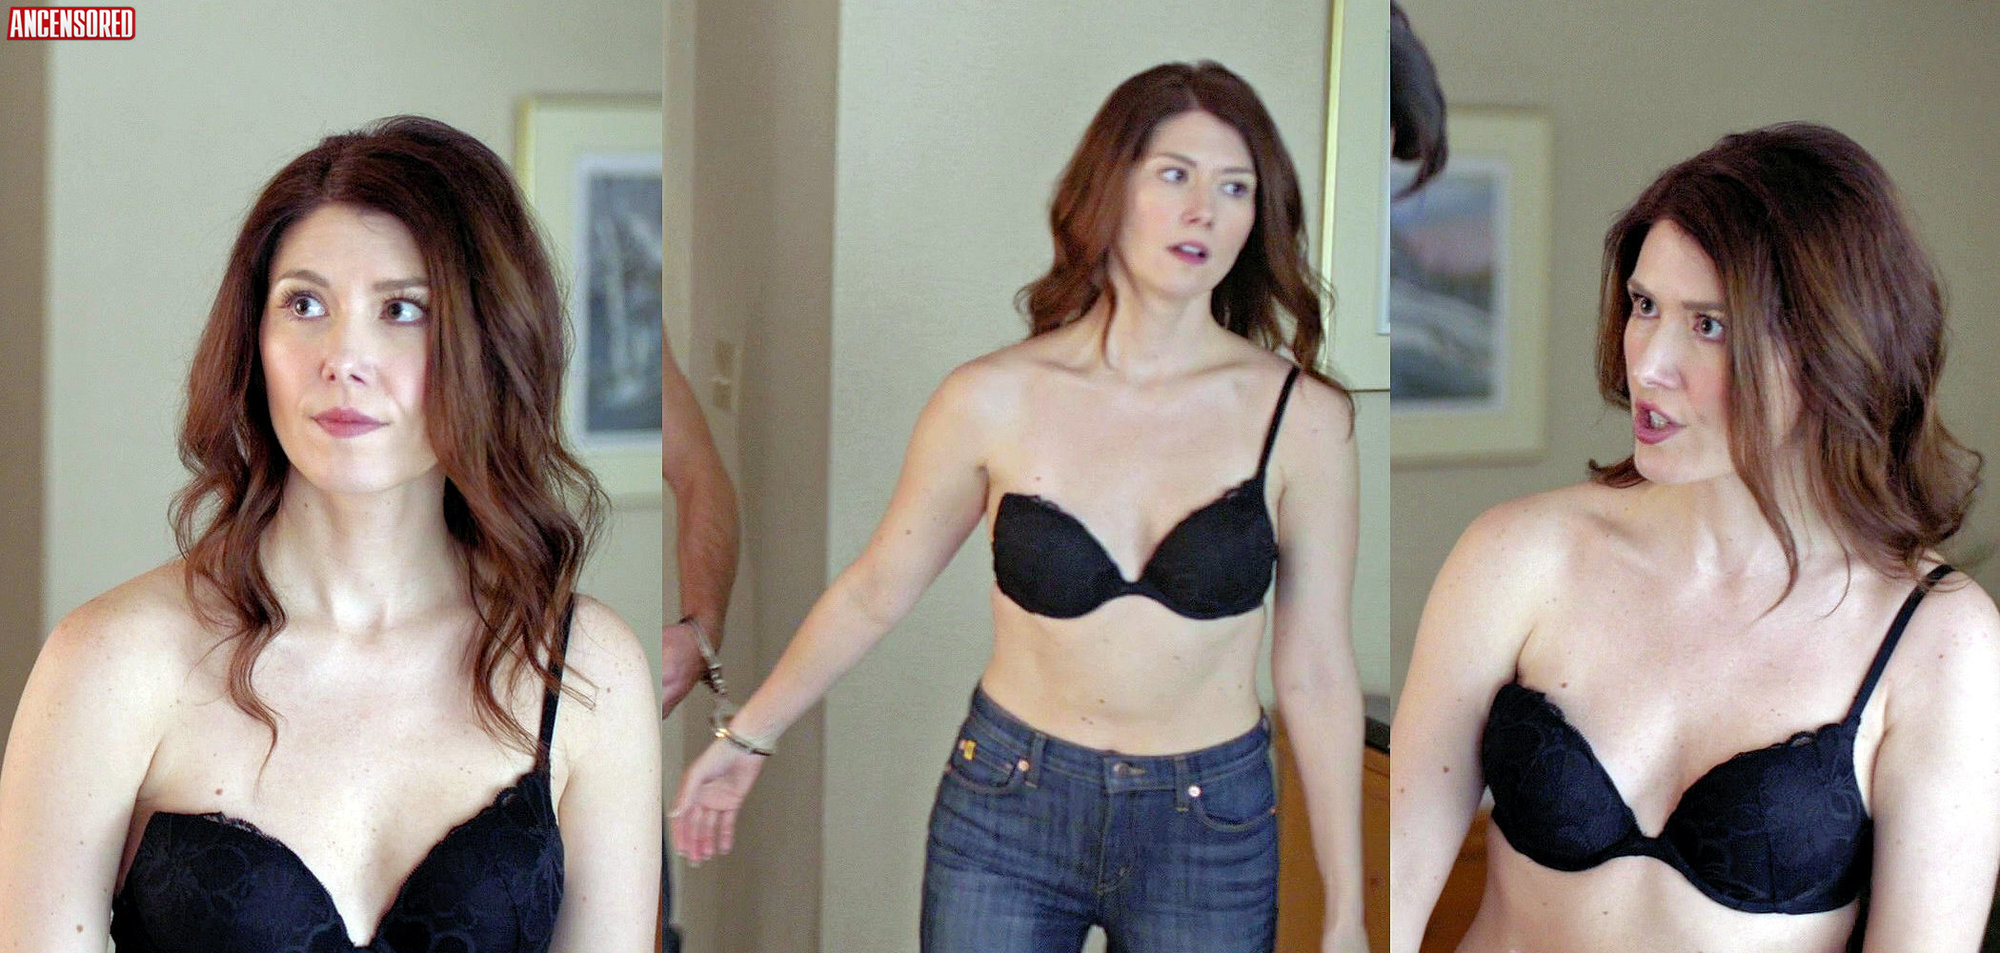 Jewel staite hot pictures